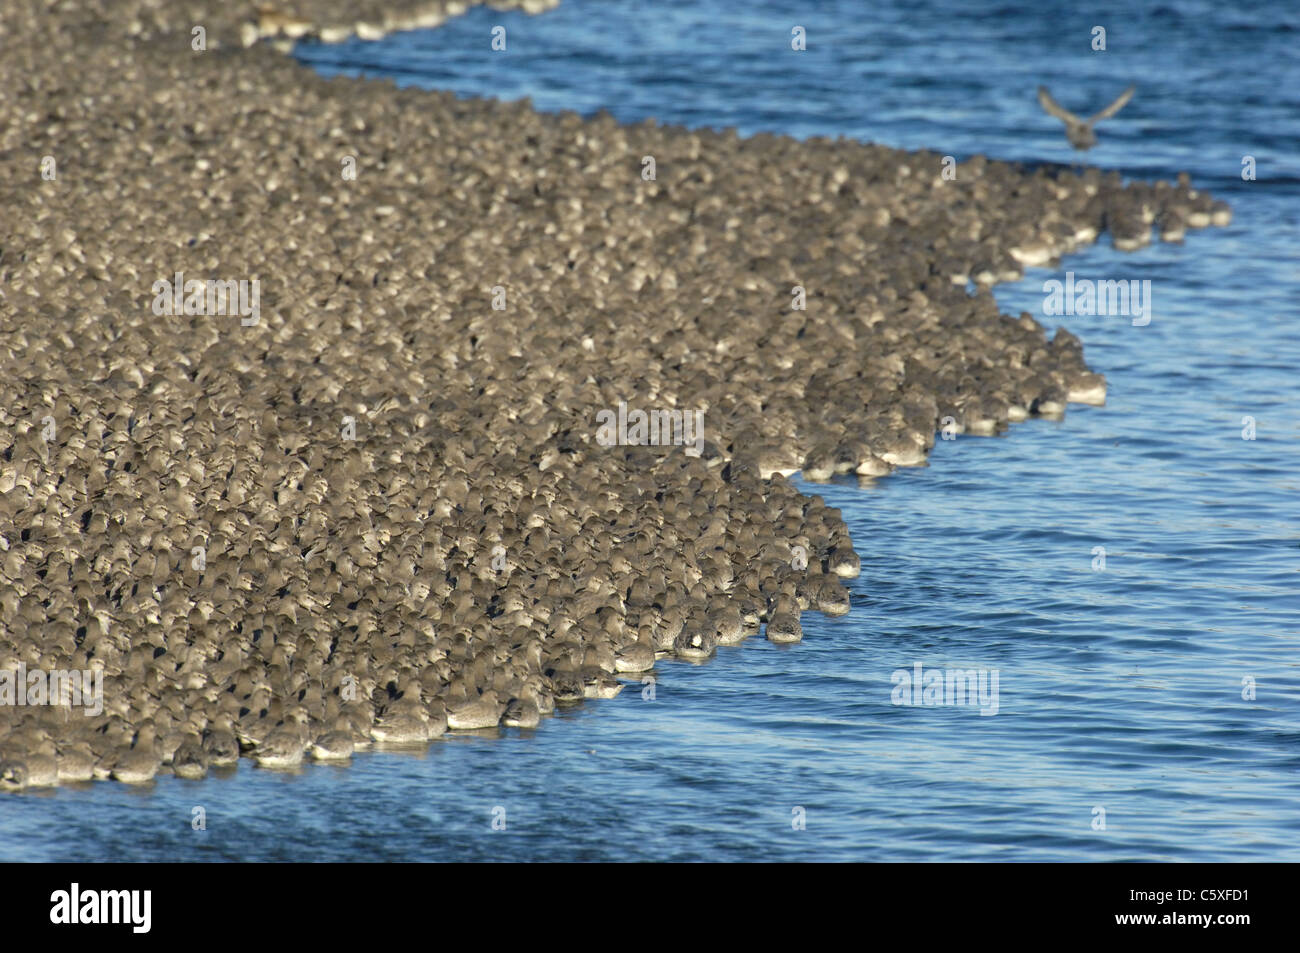 KNOT Calidris canutus  A group of 30,000 Knot roosting on a shingle bank appear to form a living coastline  Norfolk, UK Stock Photo